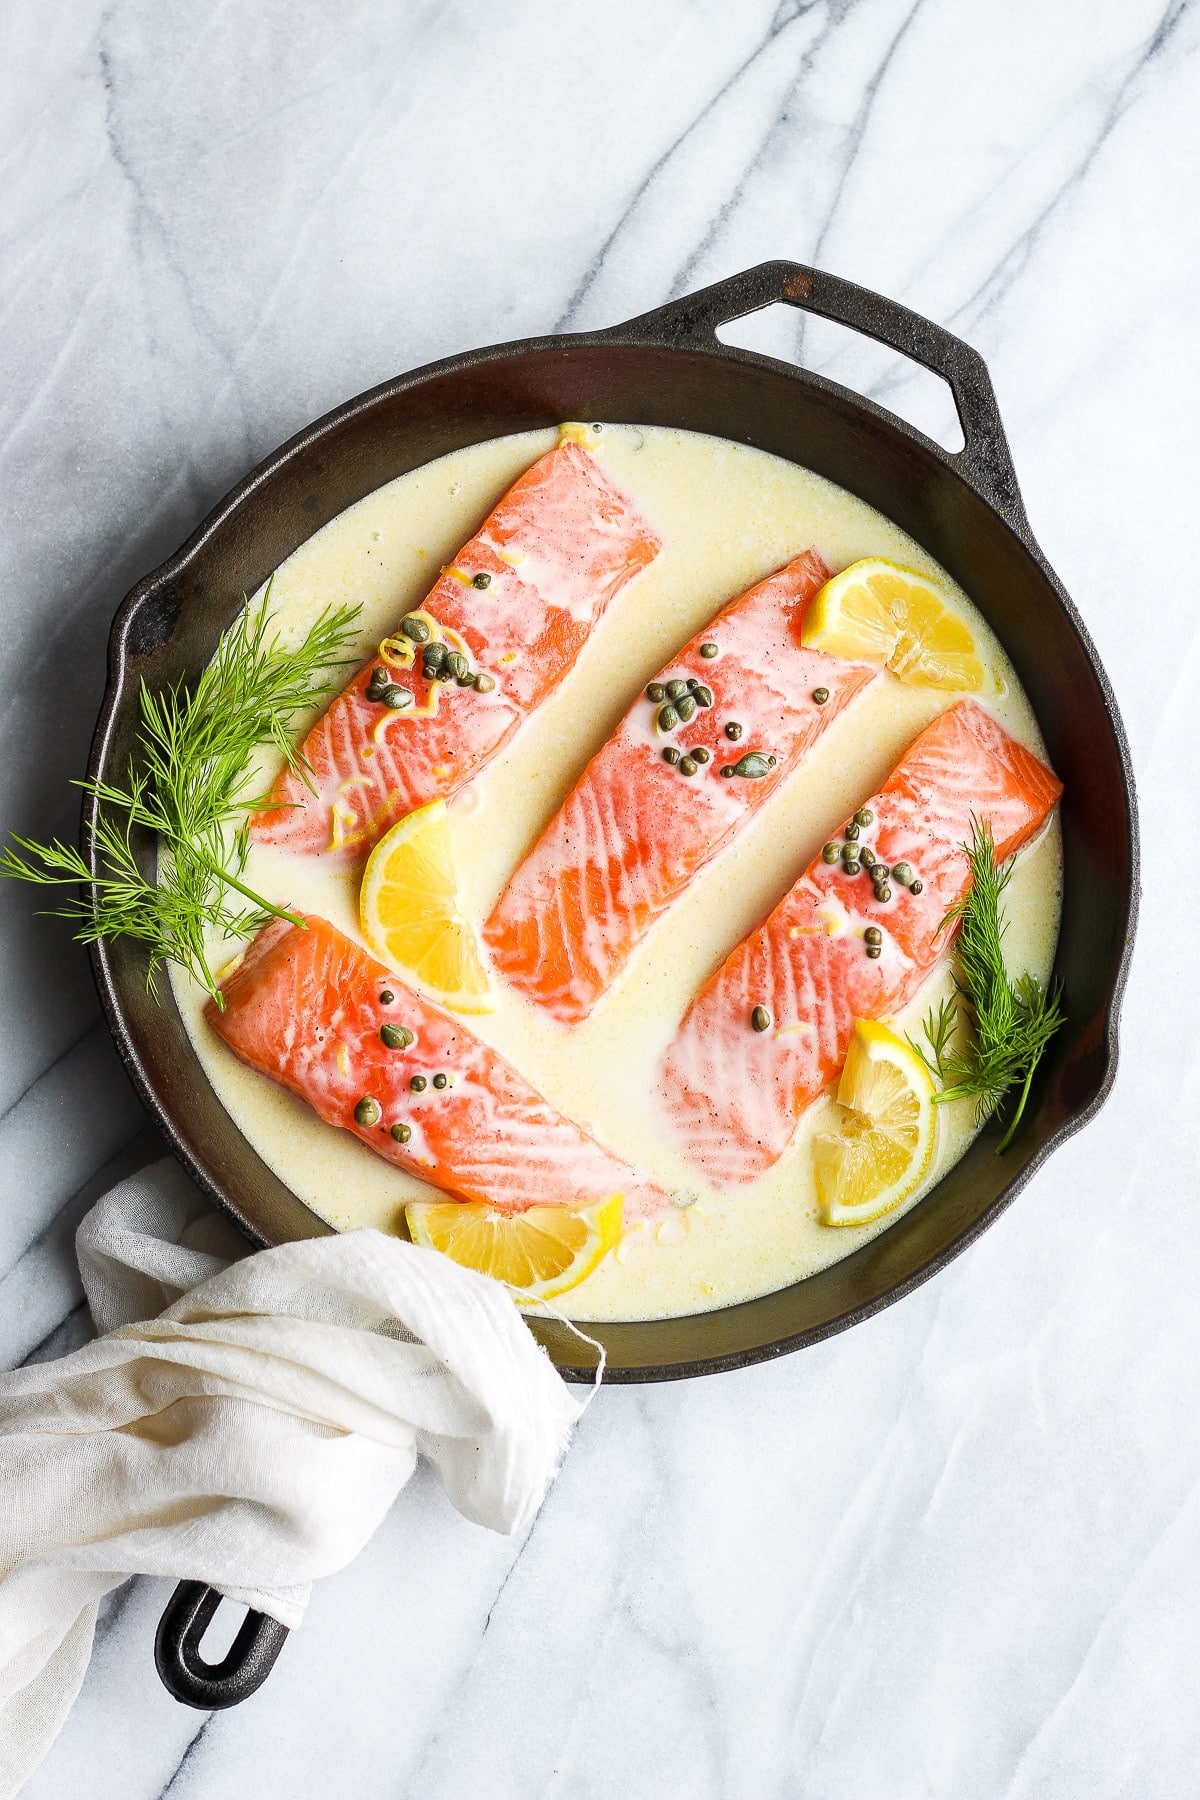 30 Minute Creamy Lemon Caper Salmon Skillet – a quick and delicious weeknight meal!! (Whole30/Paleo/Dairy-Free)